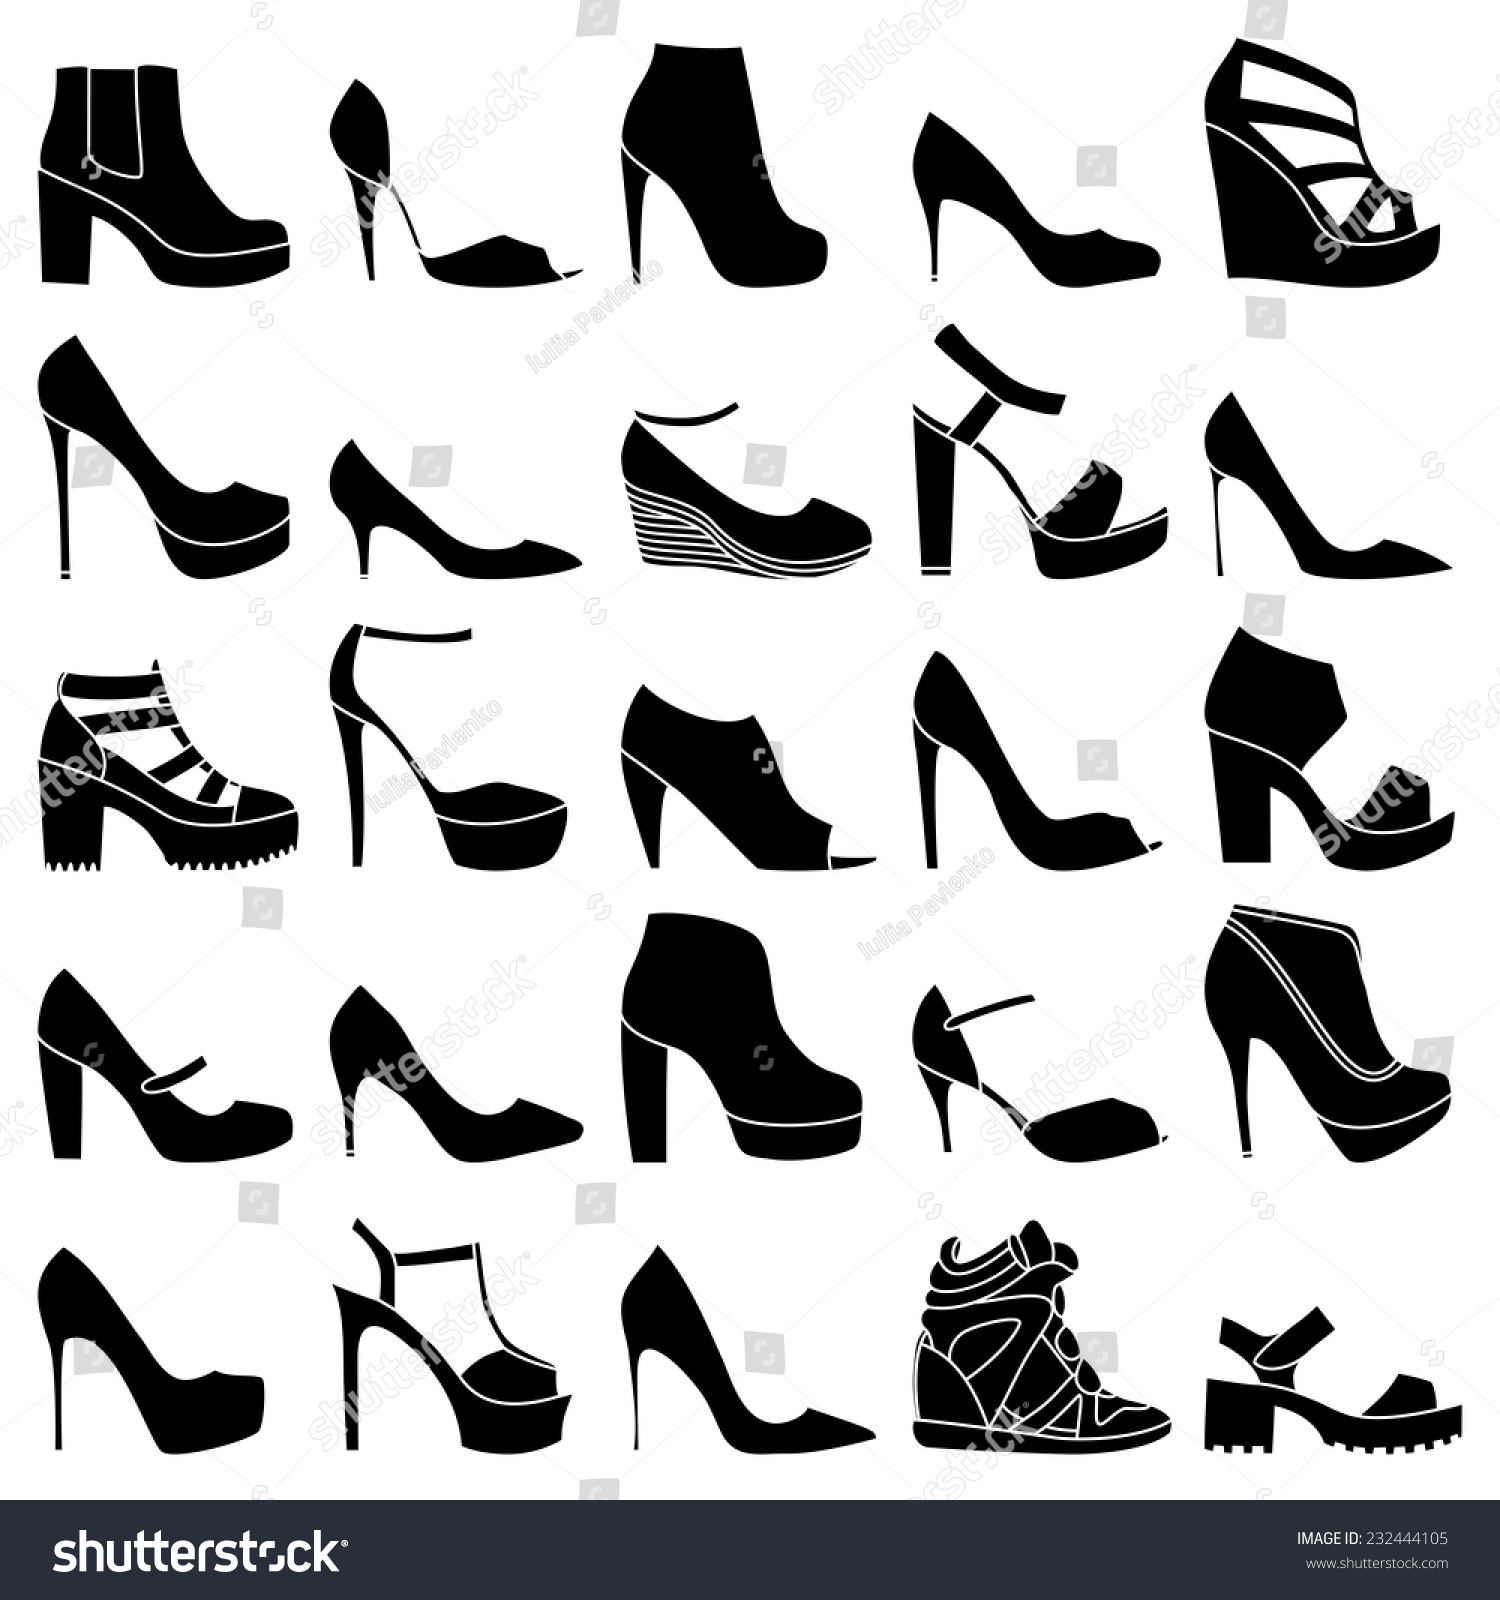 Set Of 25 Fashionable Shoes Stock Vector 232444105 : Shutterstock